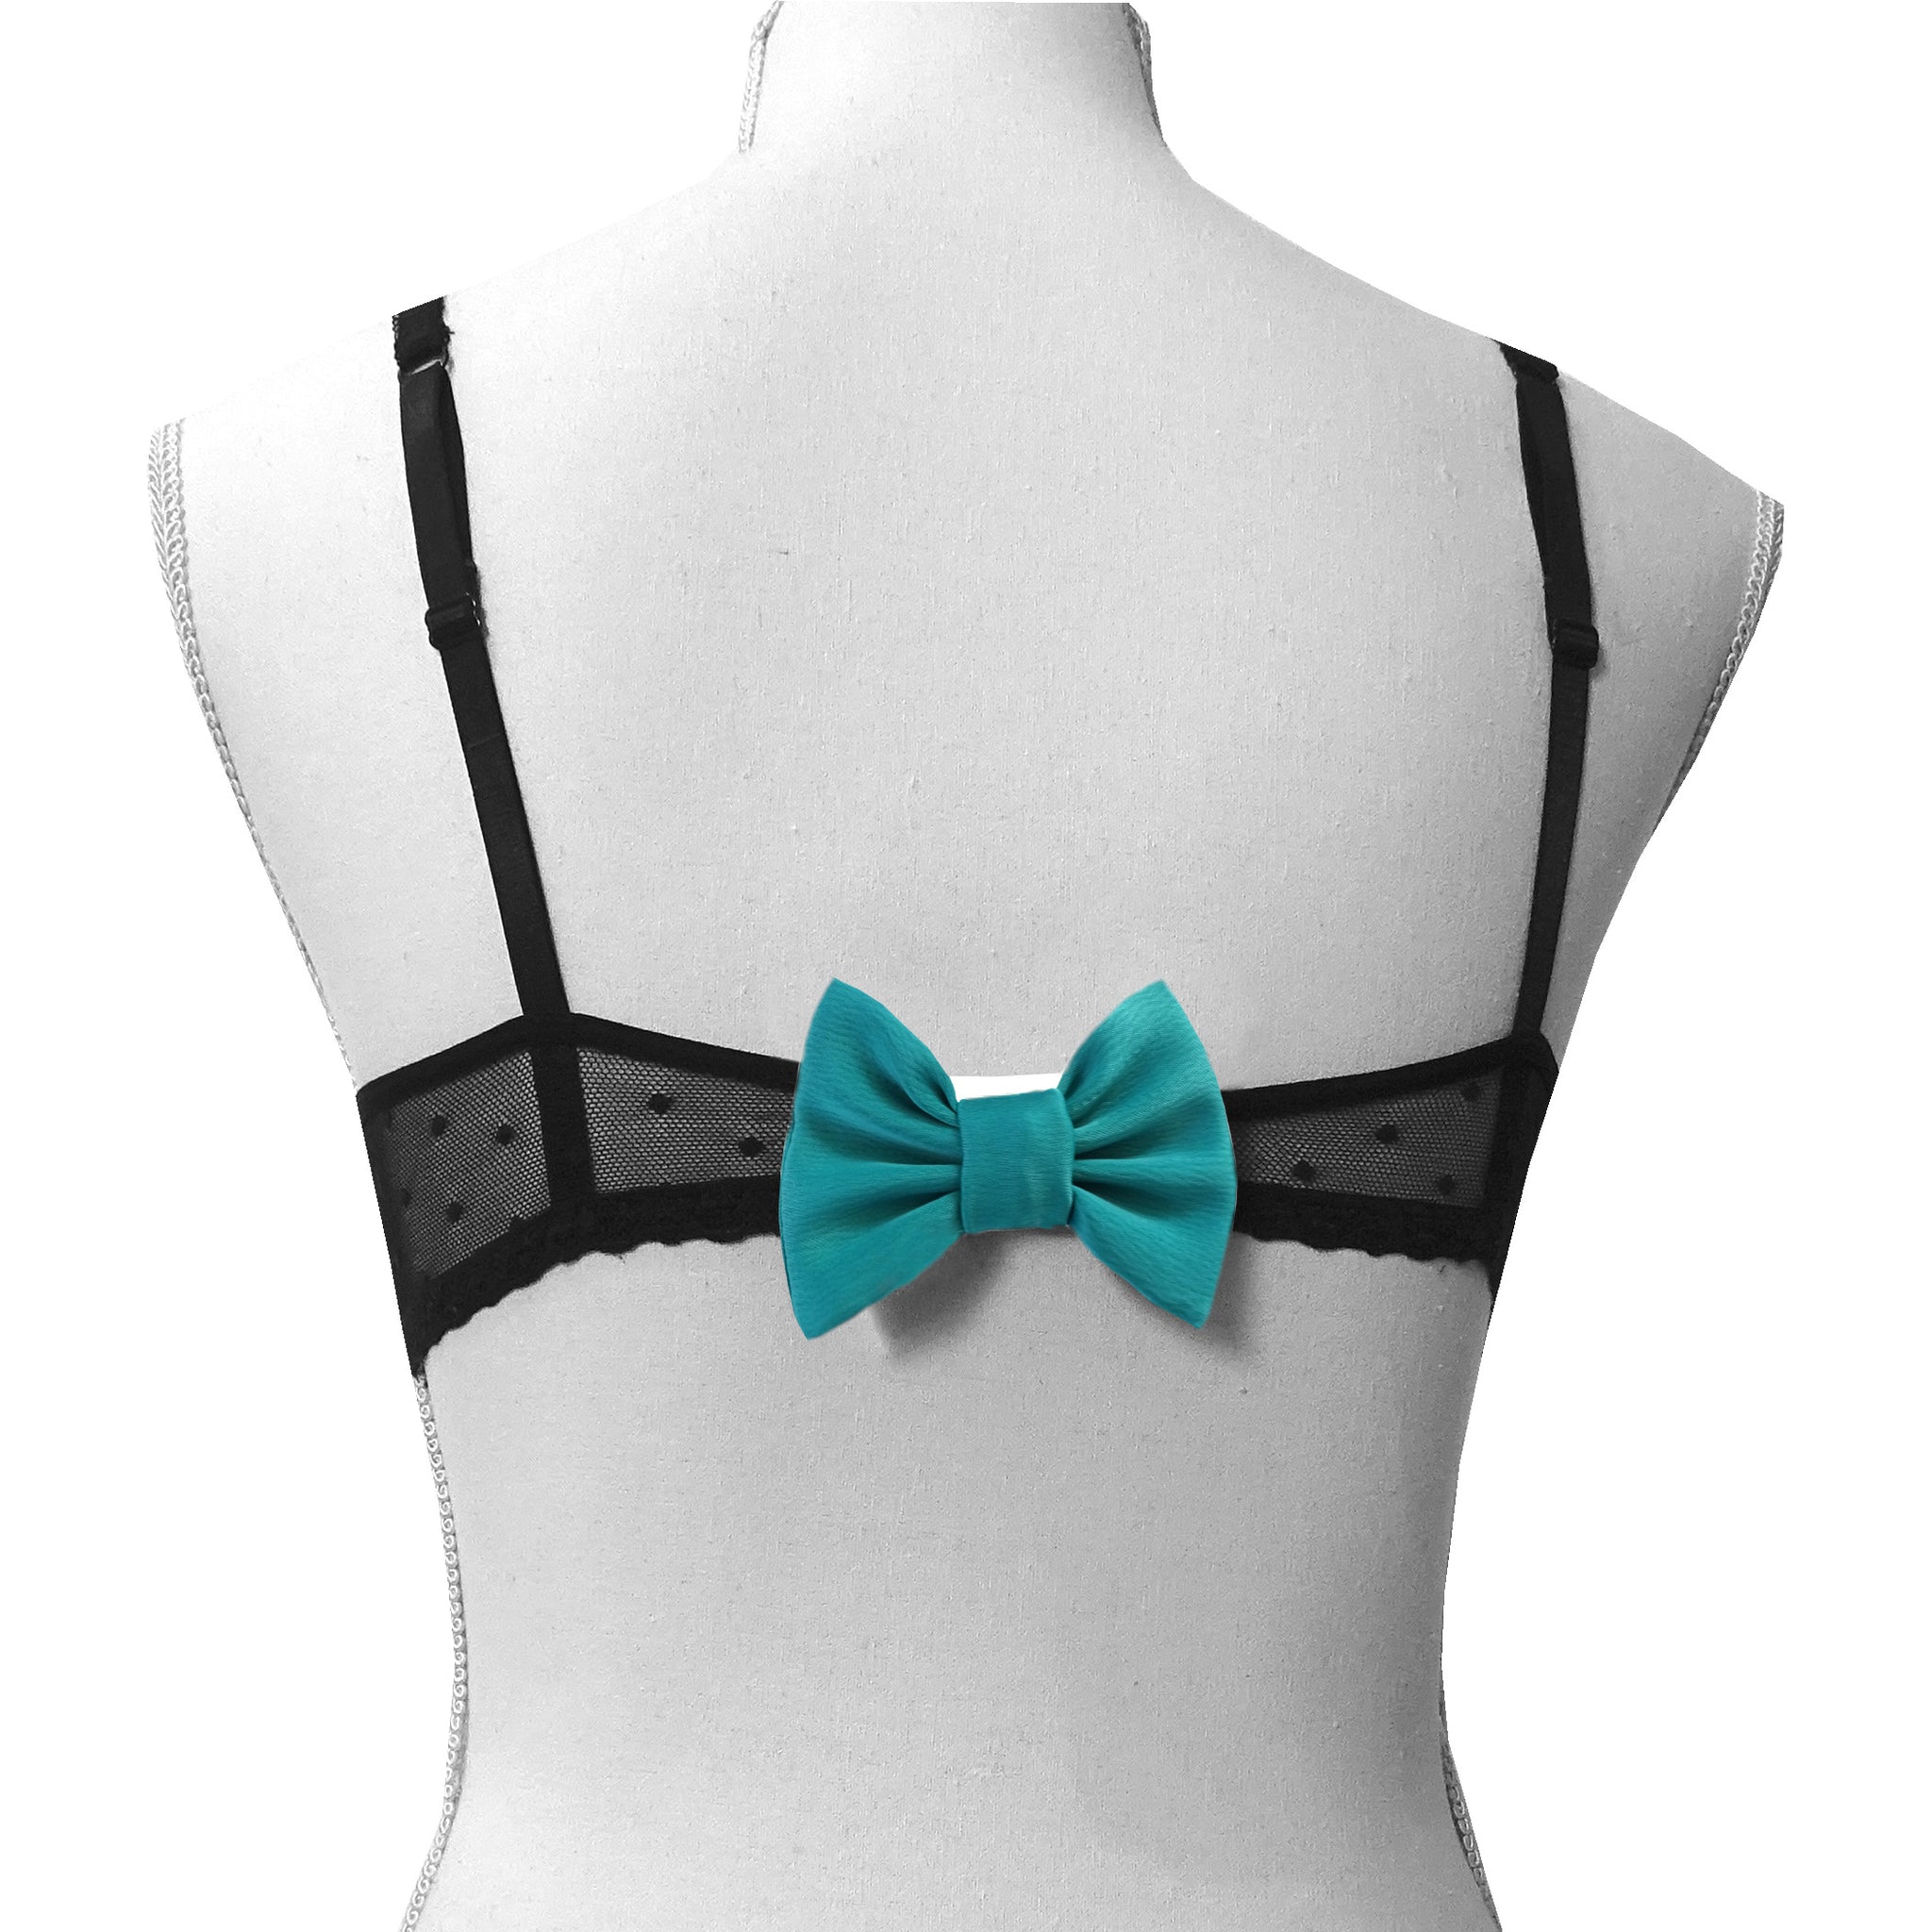 Noeud cache-agrafes de soutien-gorge Atelier Madeleine made in France satin turquoise